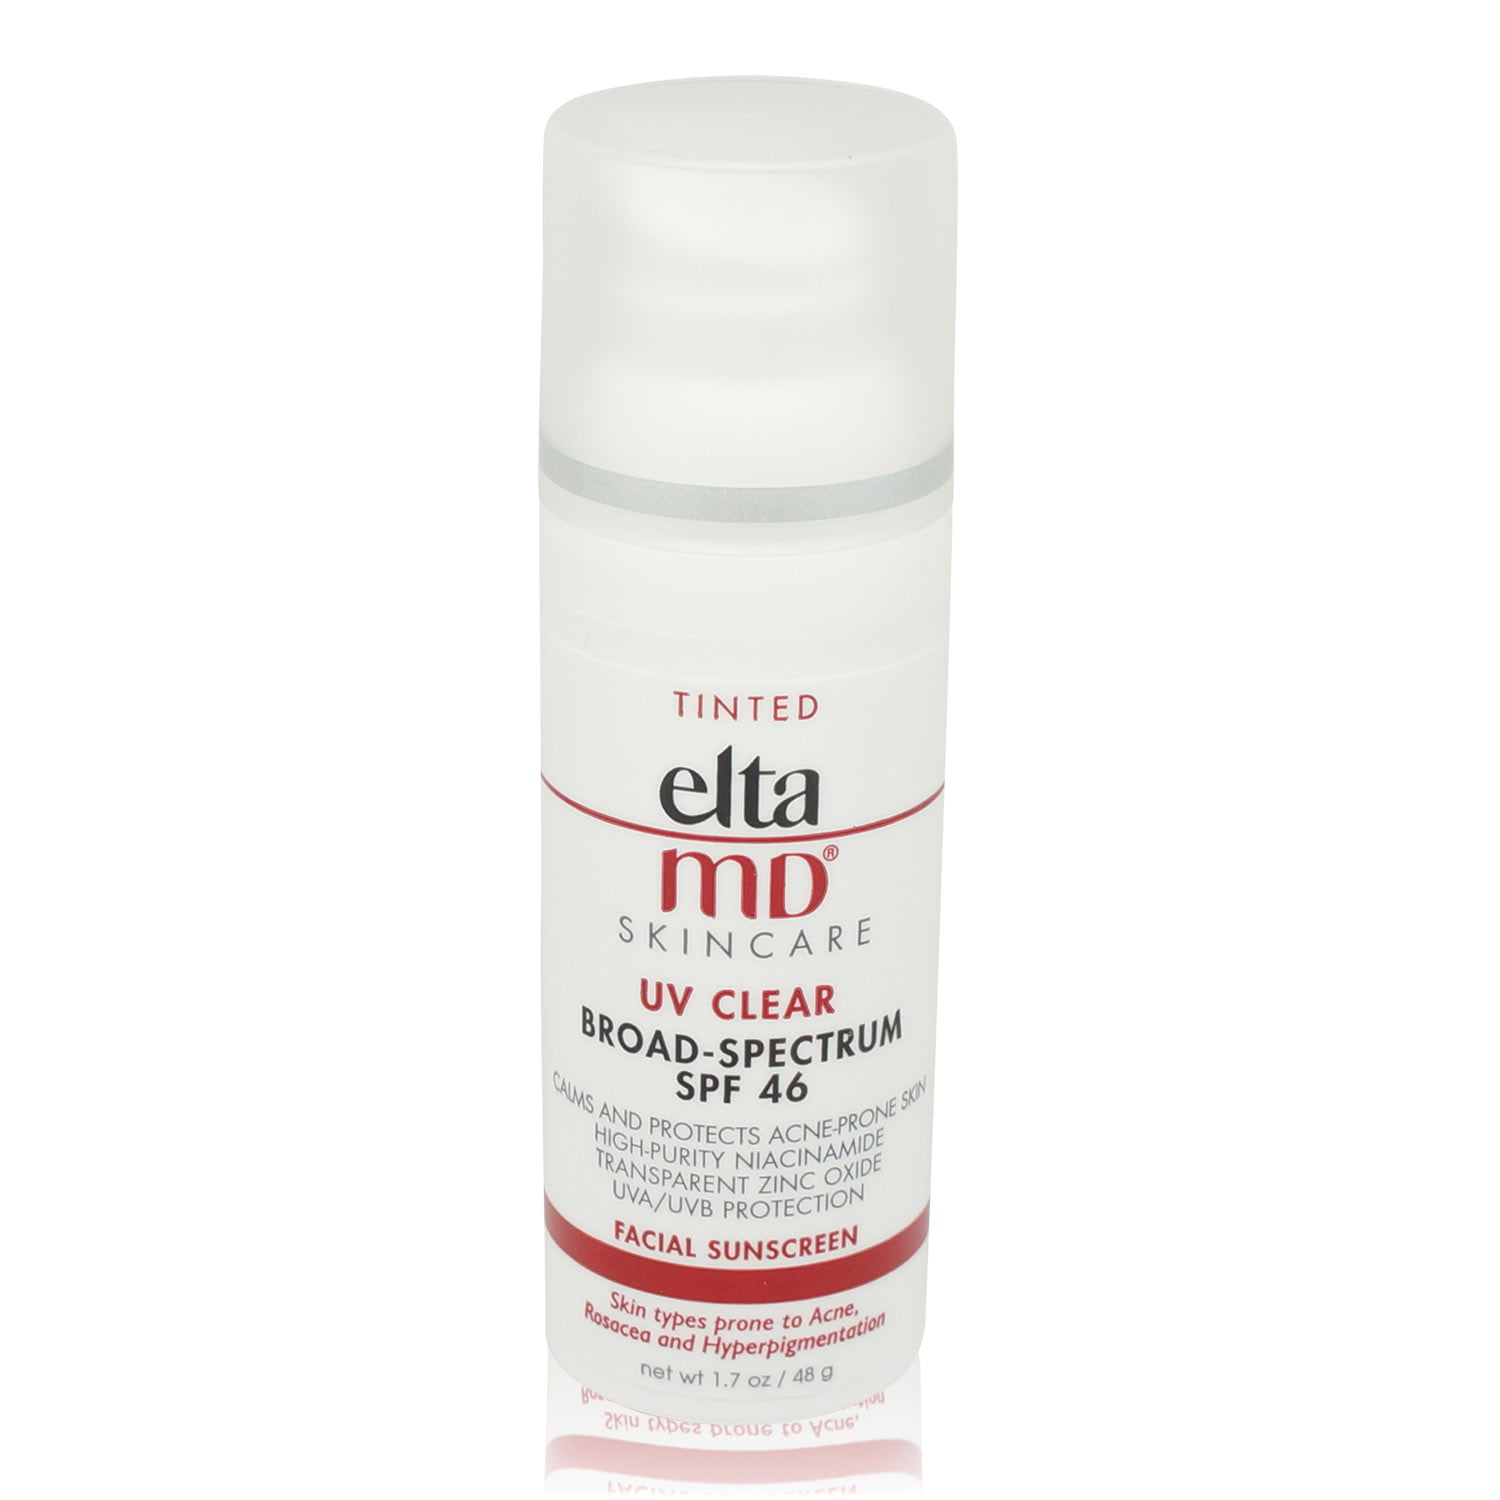 elta md tinted sunscreen review